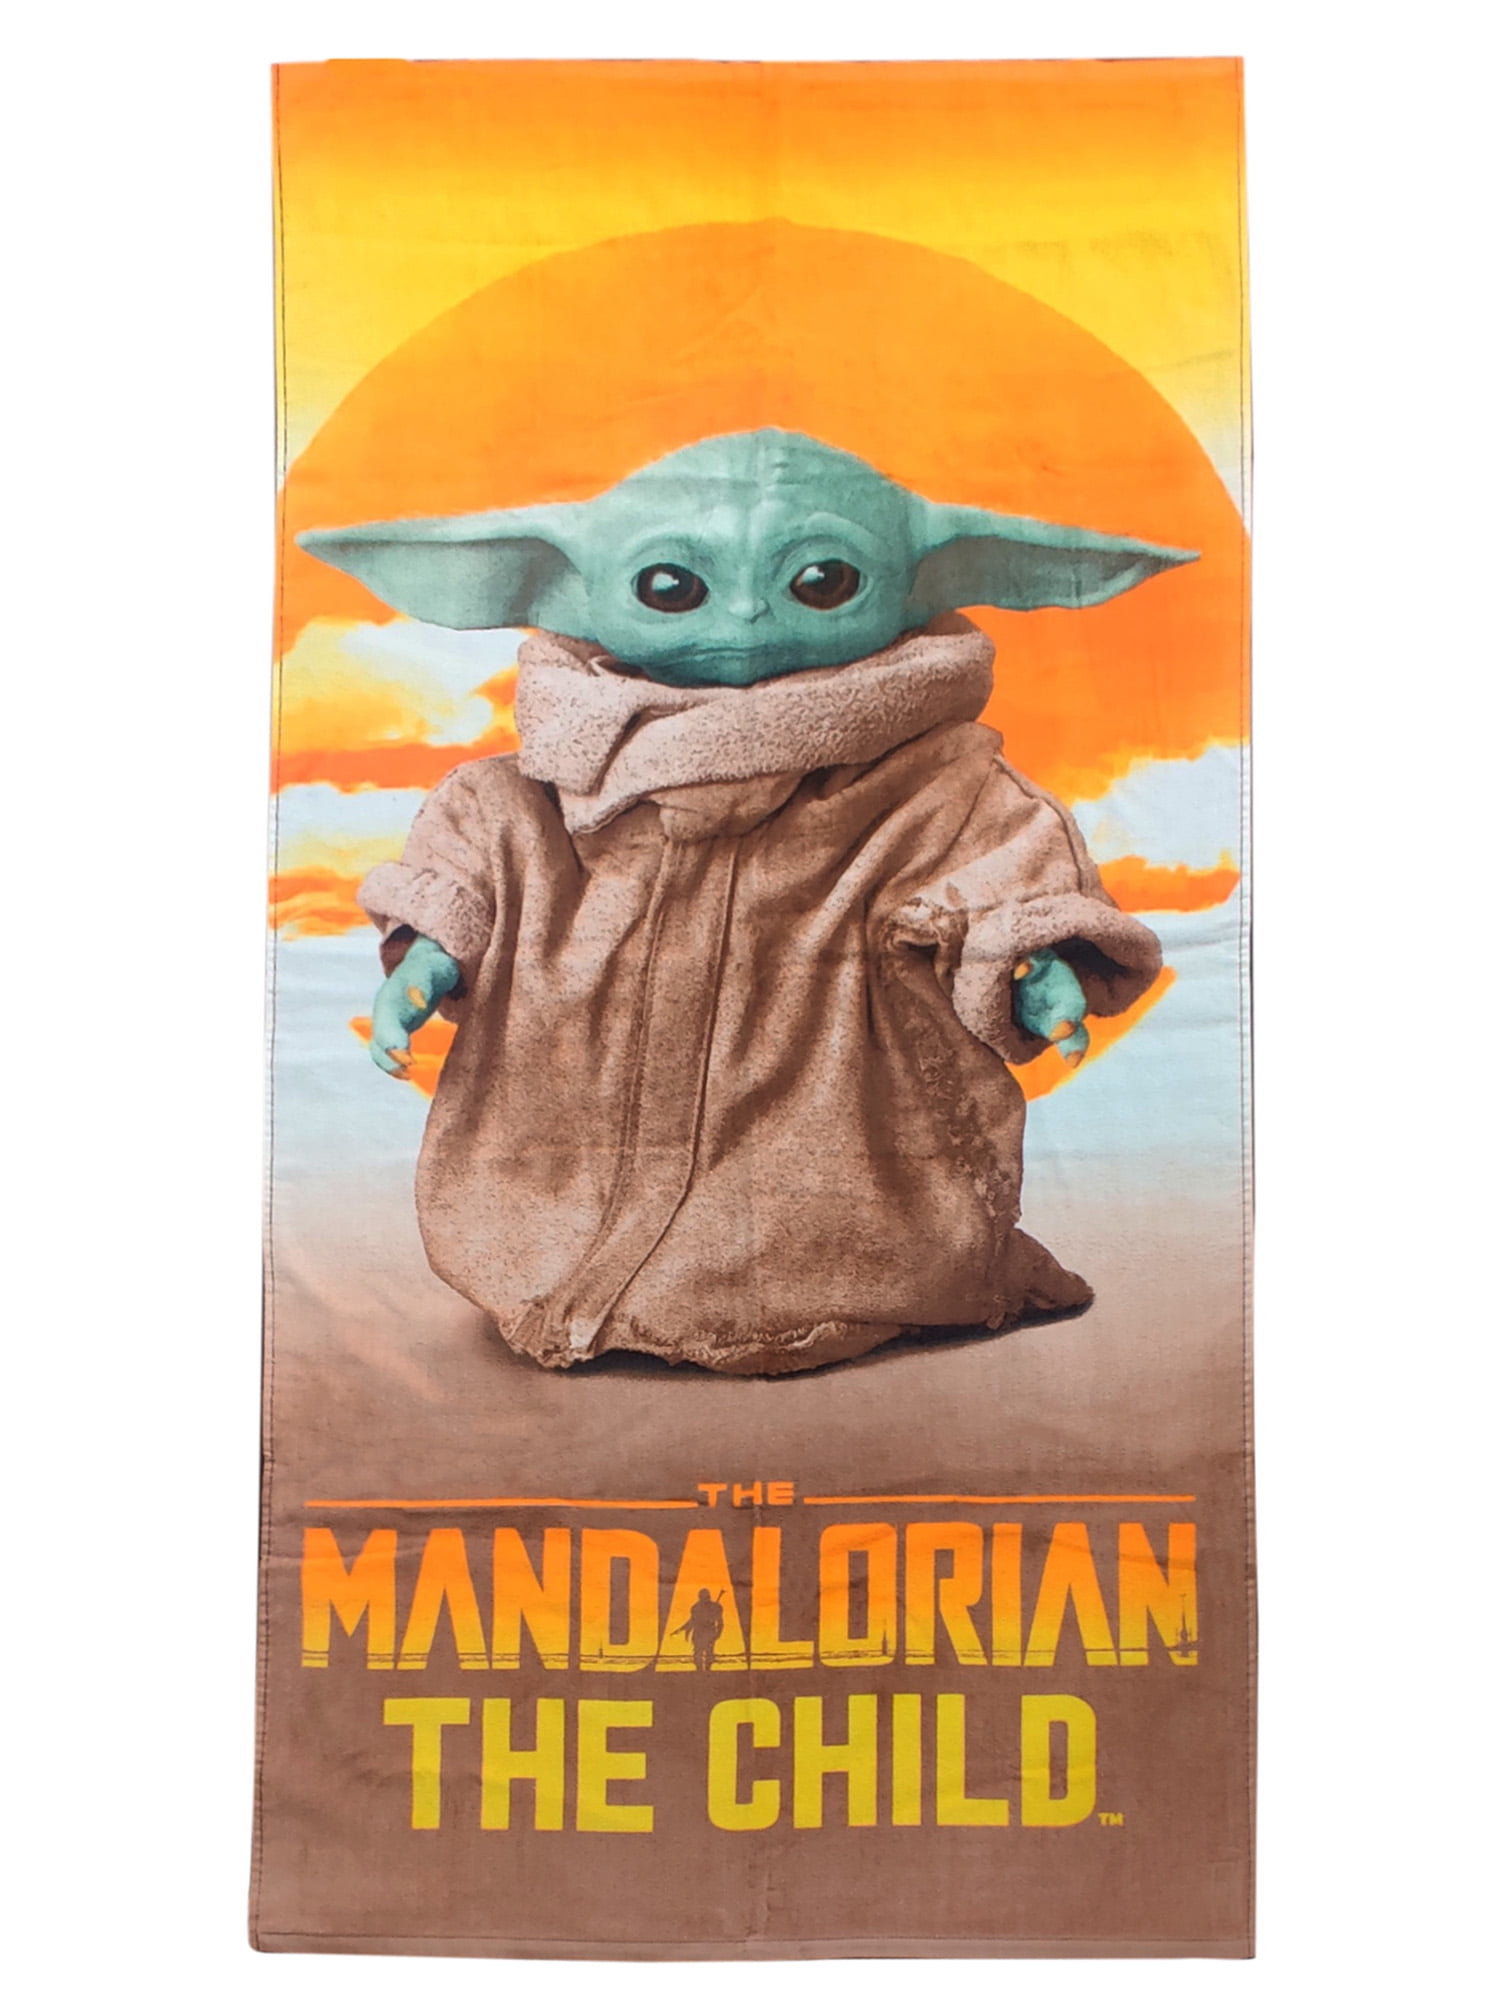 Star Wars The Mandalorian Woke Up Like This Kids Large Bath//Pool//Beach Towel Super Soft /& Absorbent Fade Resistant Cotton Official Star Wars Product Features Baby Yoda Measures 34 x 64 inches